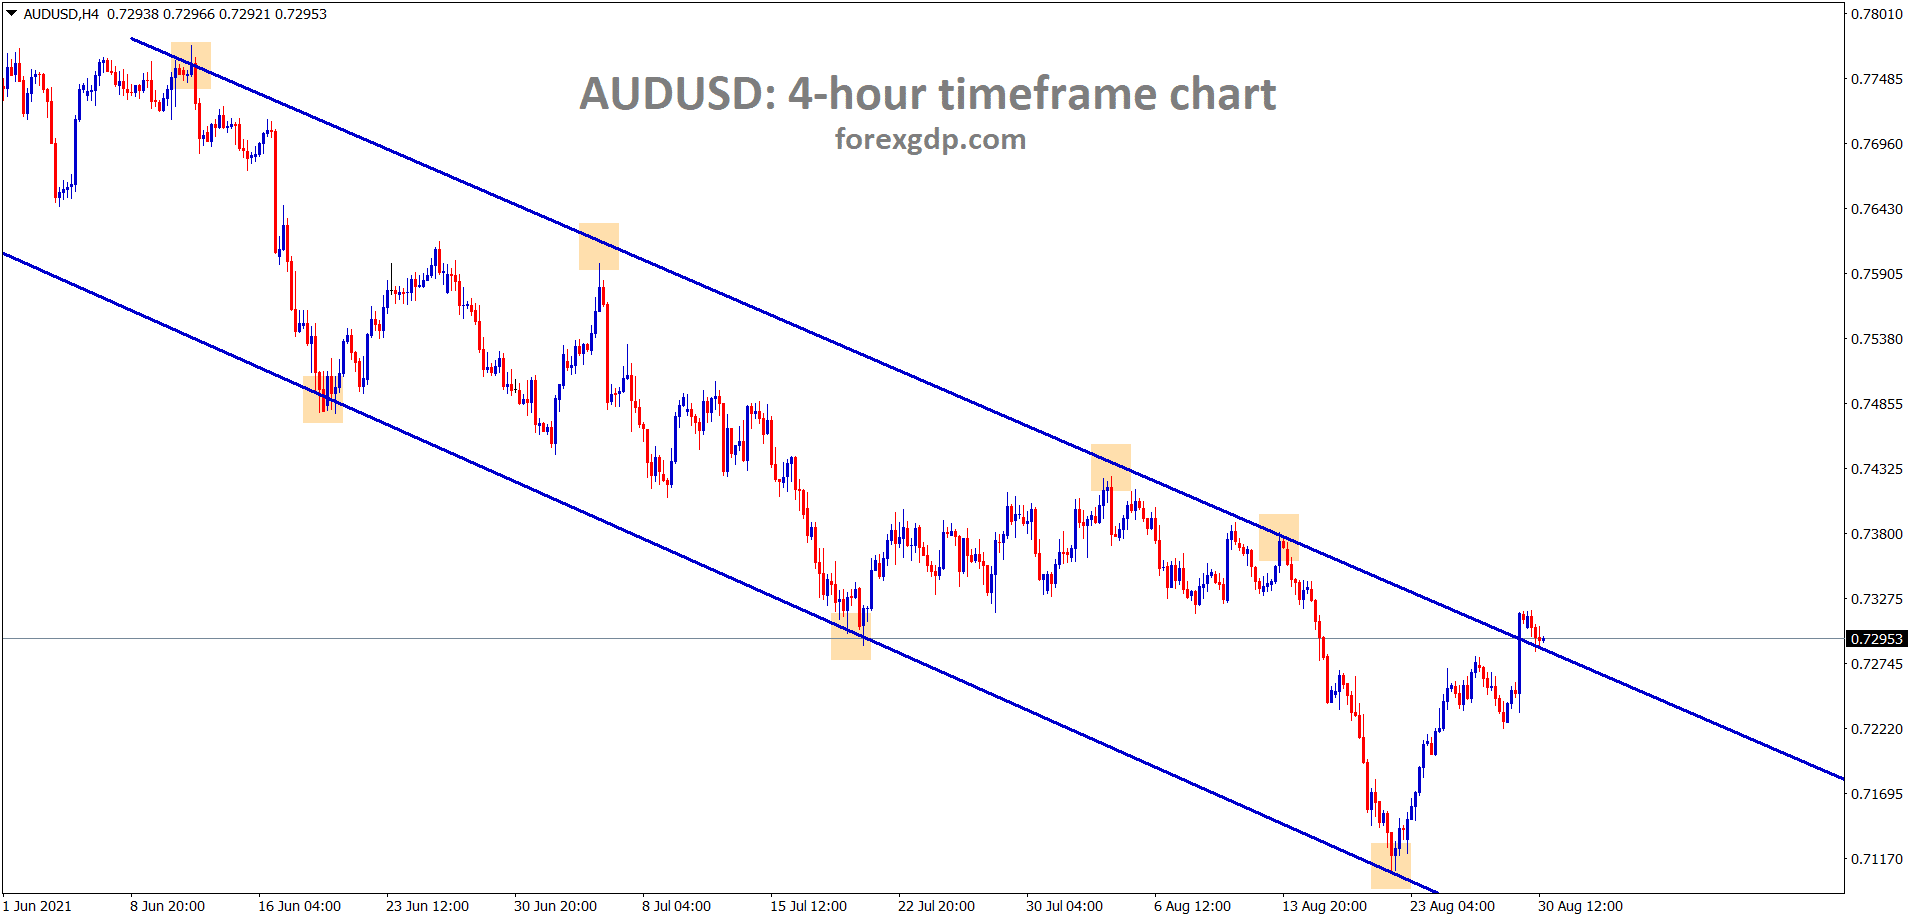 AUDUSD is trying to break the lower high of the descending channel wait for the confirmation of breakout or reversal